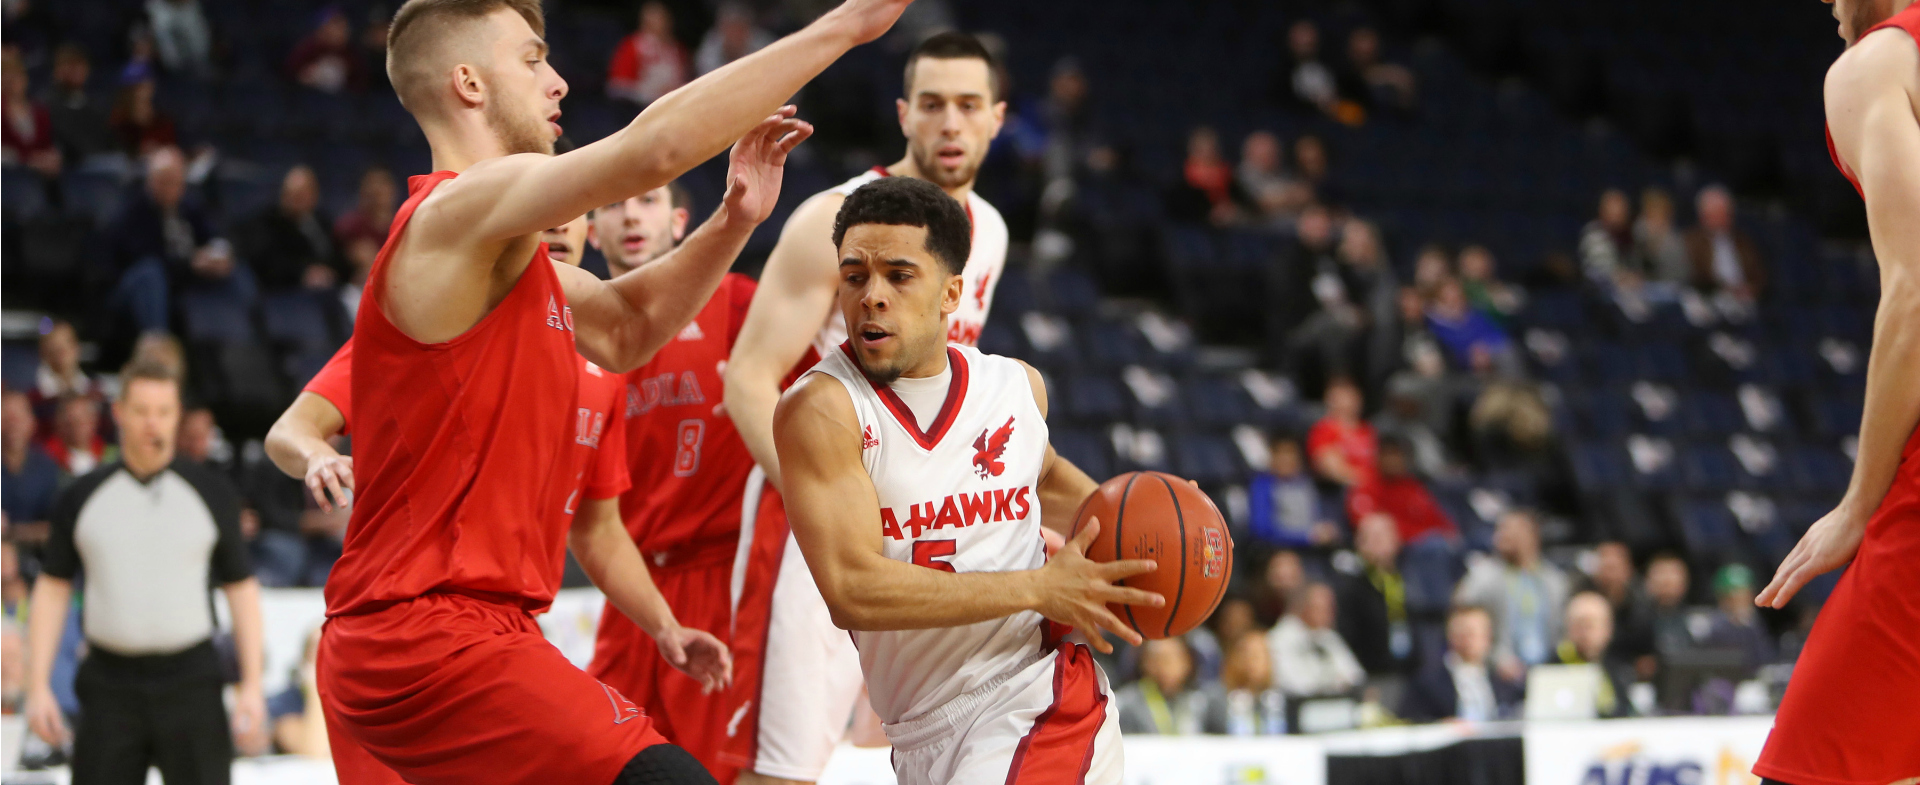 Axemen top Sea-Hawks 73-65 to advance to AUS semifinals 